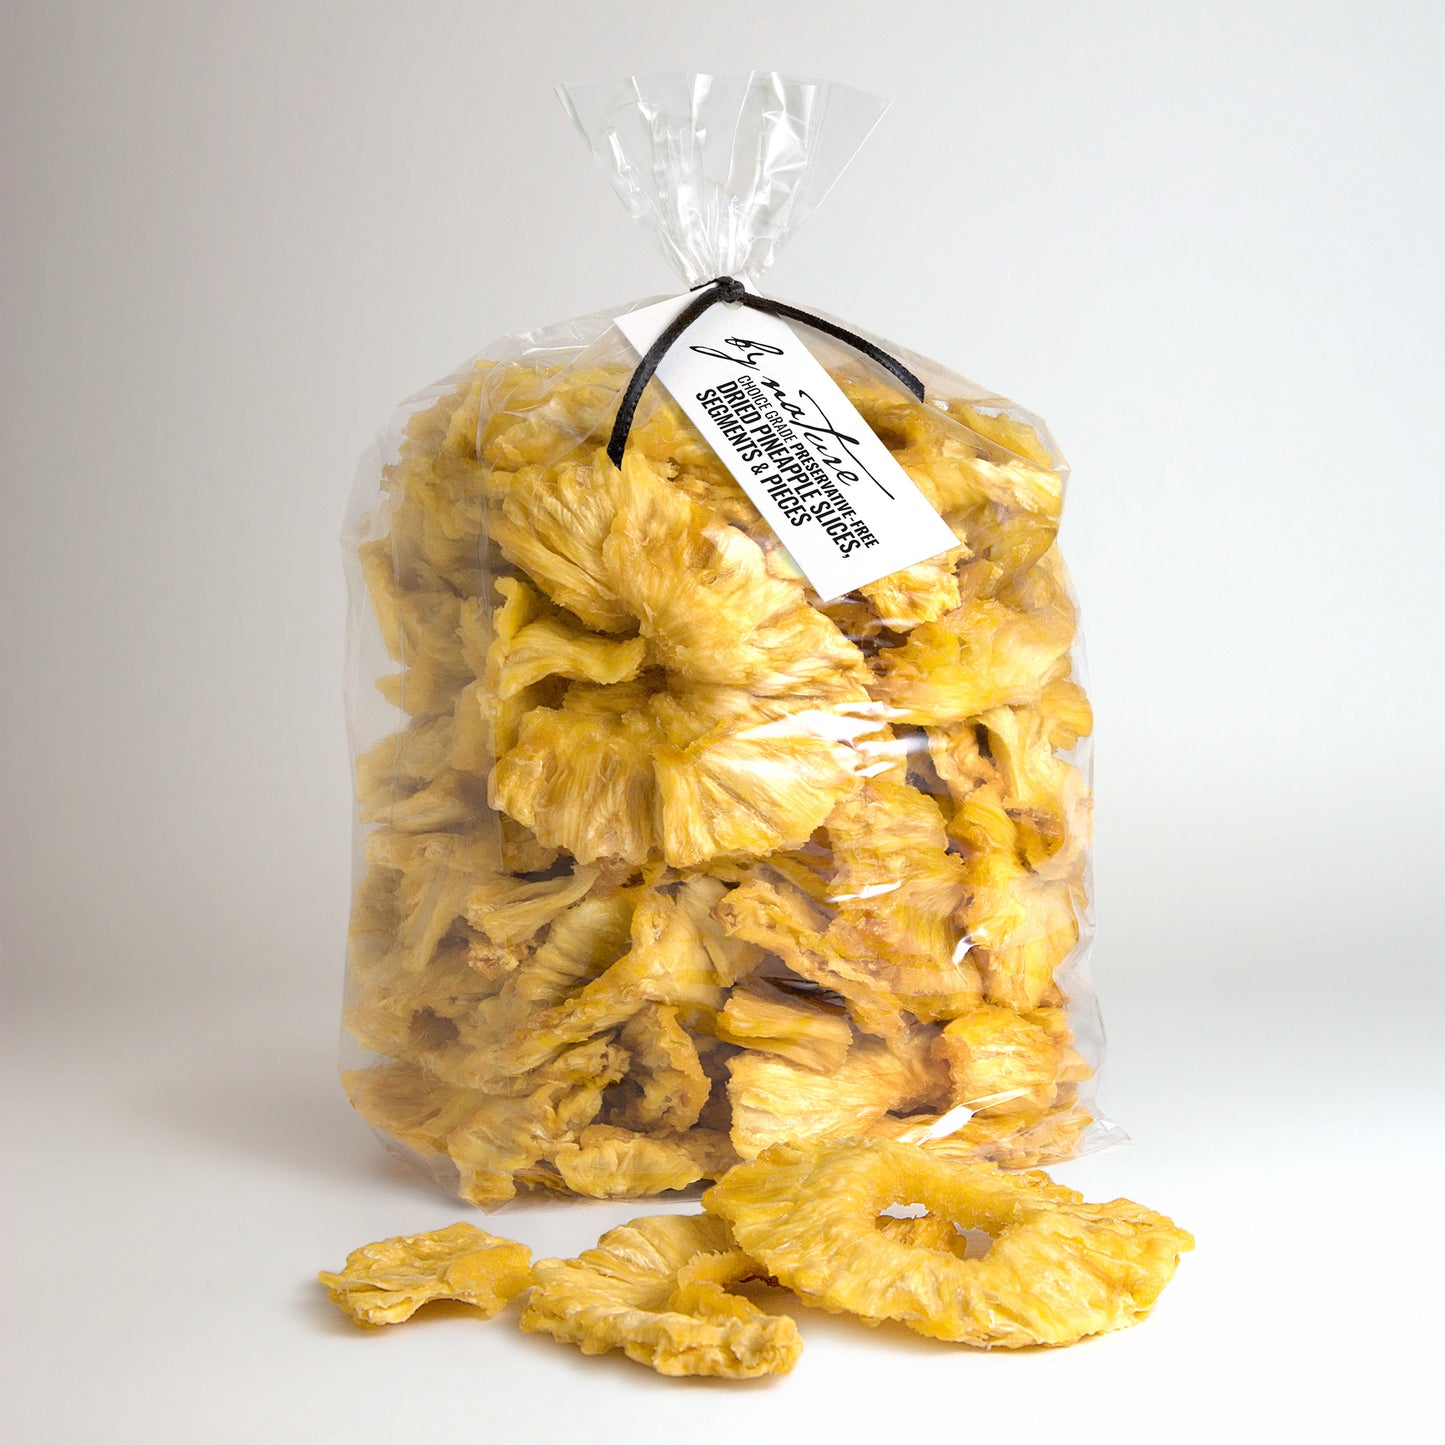 BY NATURE Dried Pineapple Pieces, 1kg - preservative-free.